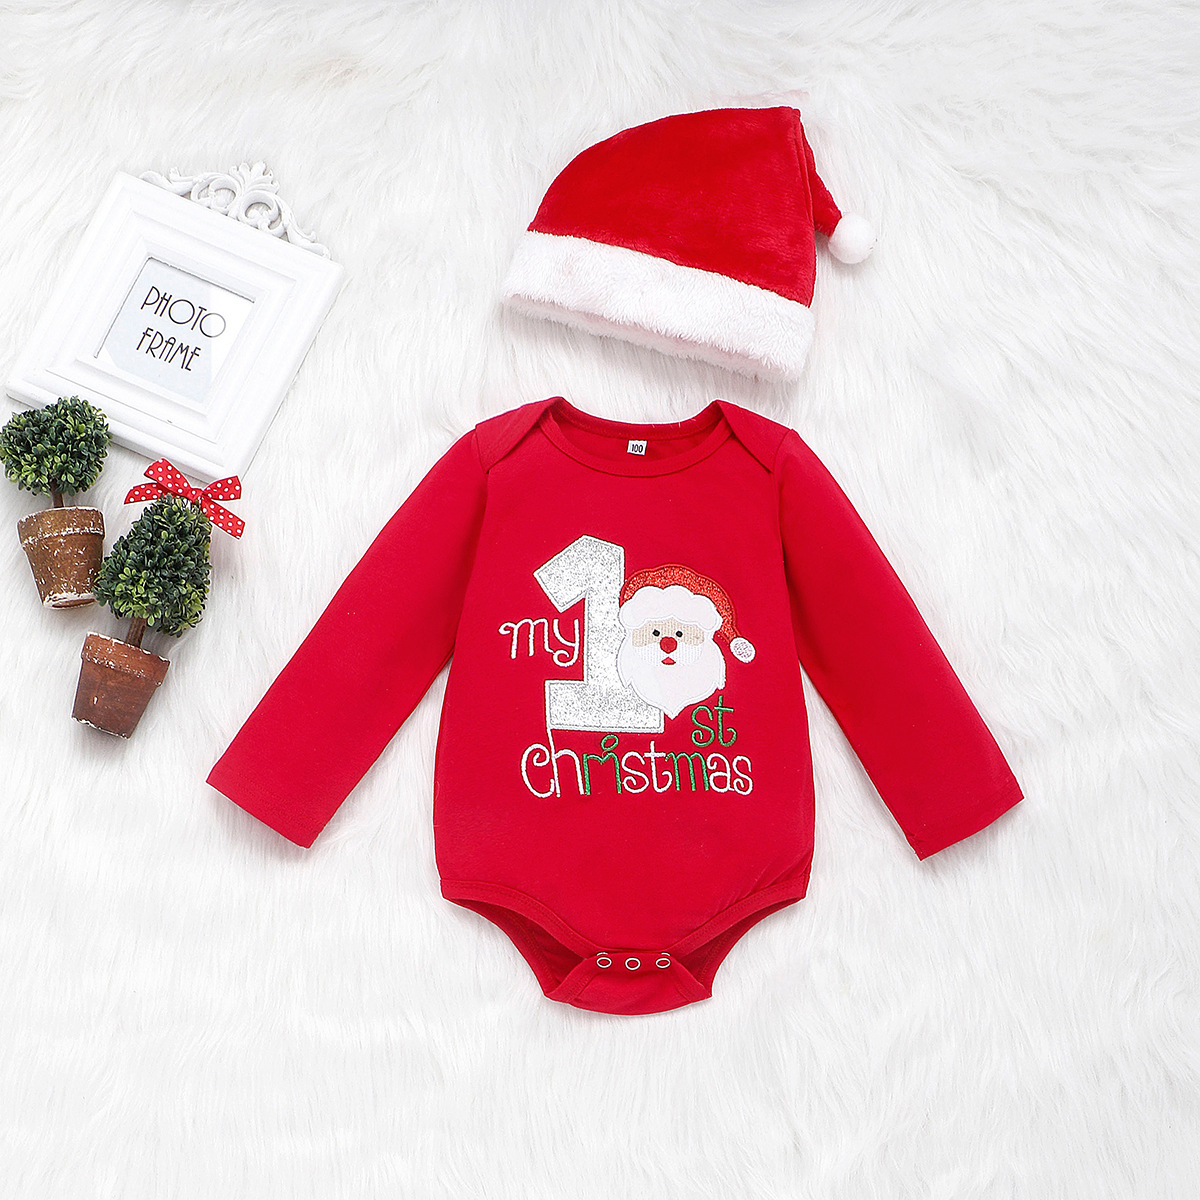 Festive Santa Claus Kids Set: Spread holiday joy with this adorable ensemble—in-store now for celebrations! image 2